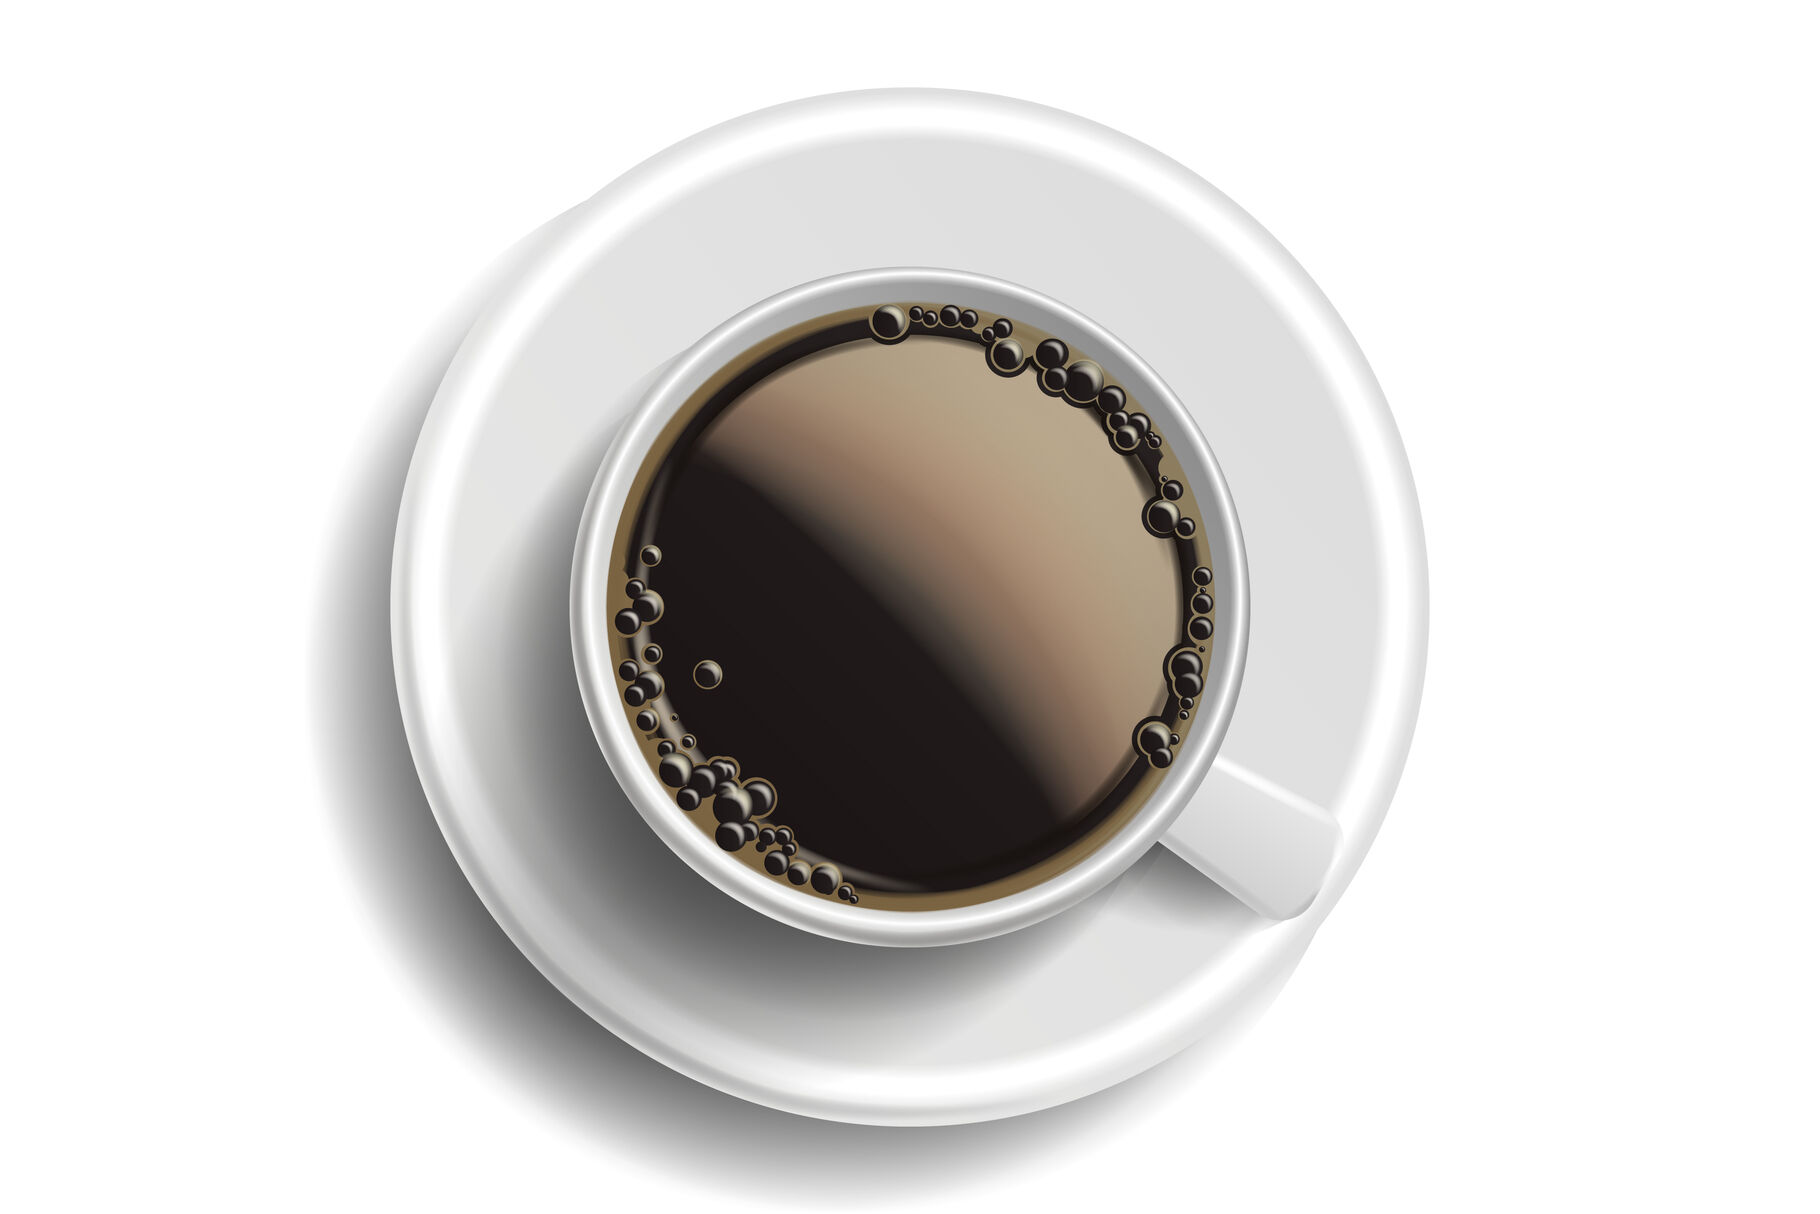 Hot Americano Photos and Images